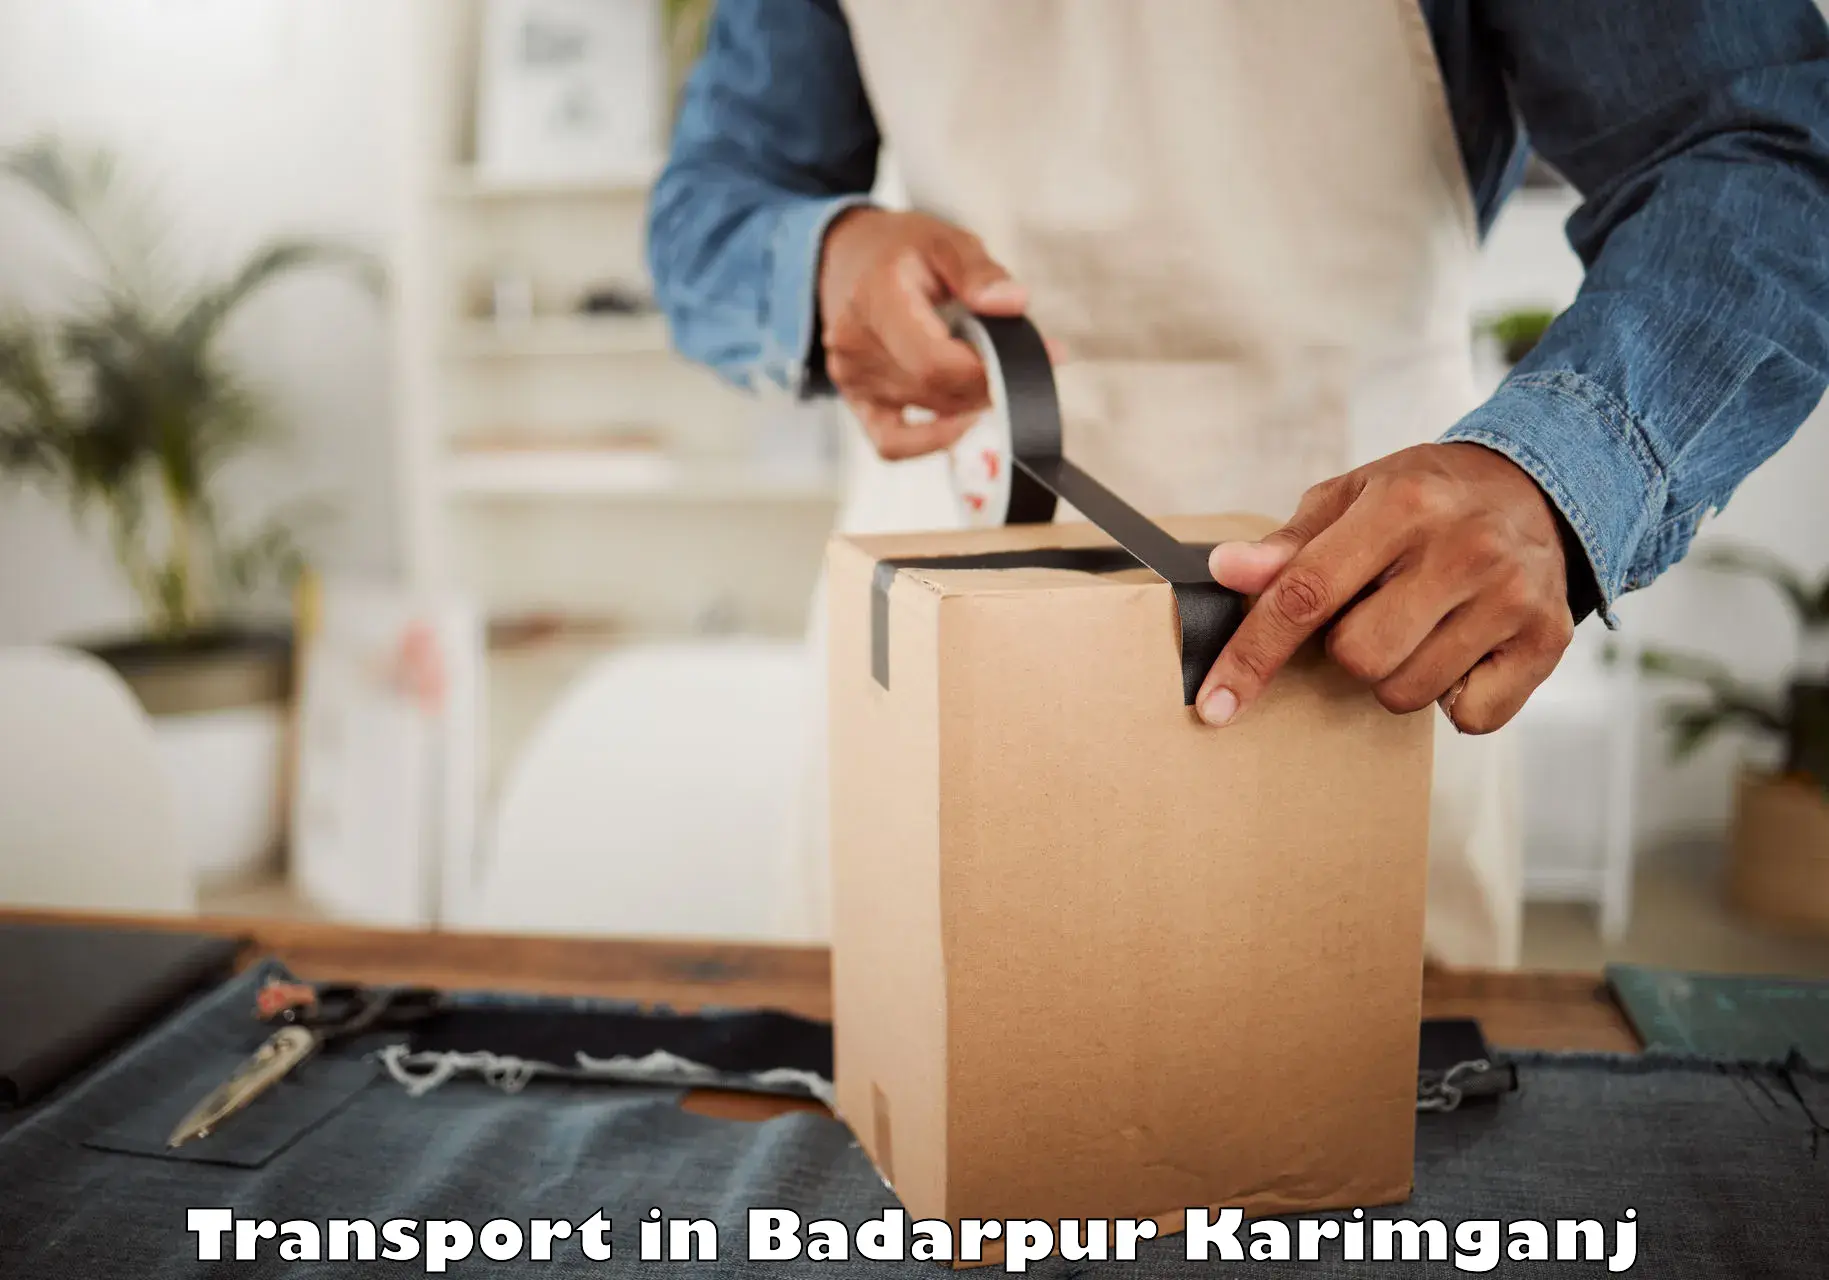 Transport bike from one state to another in Badarpur Karimganj